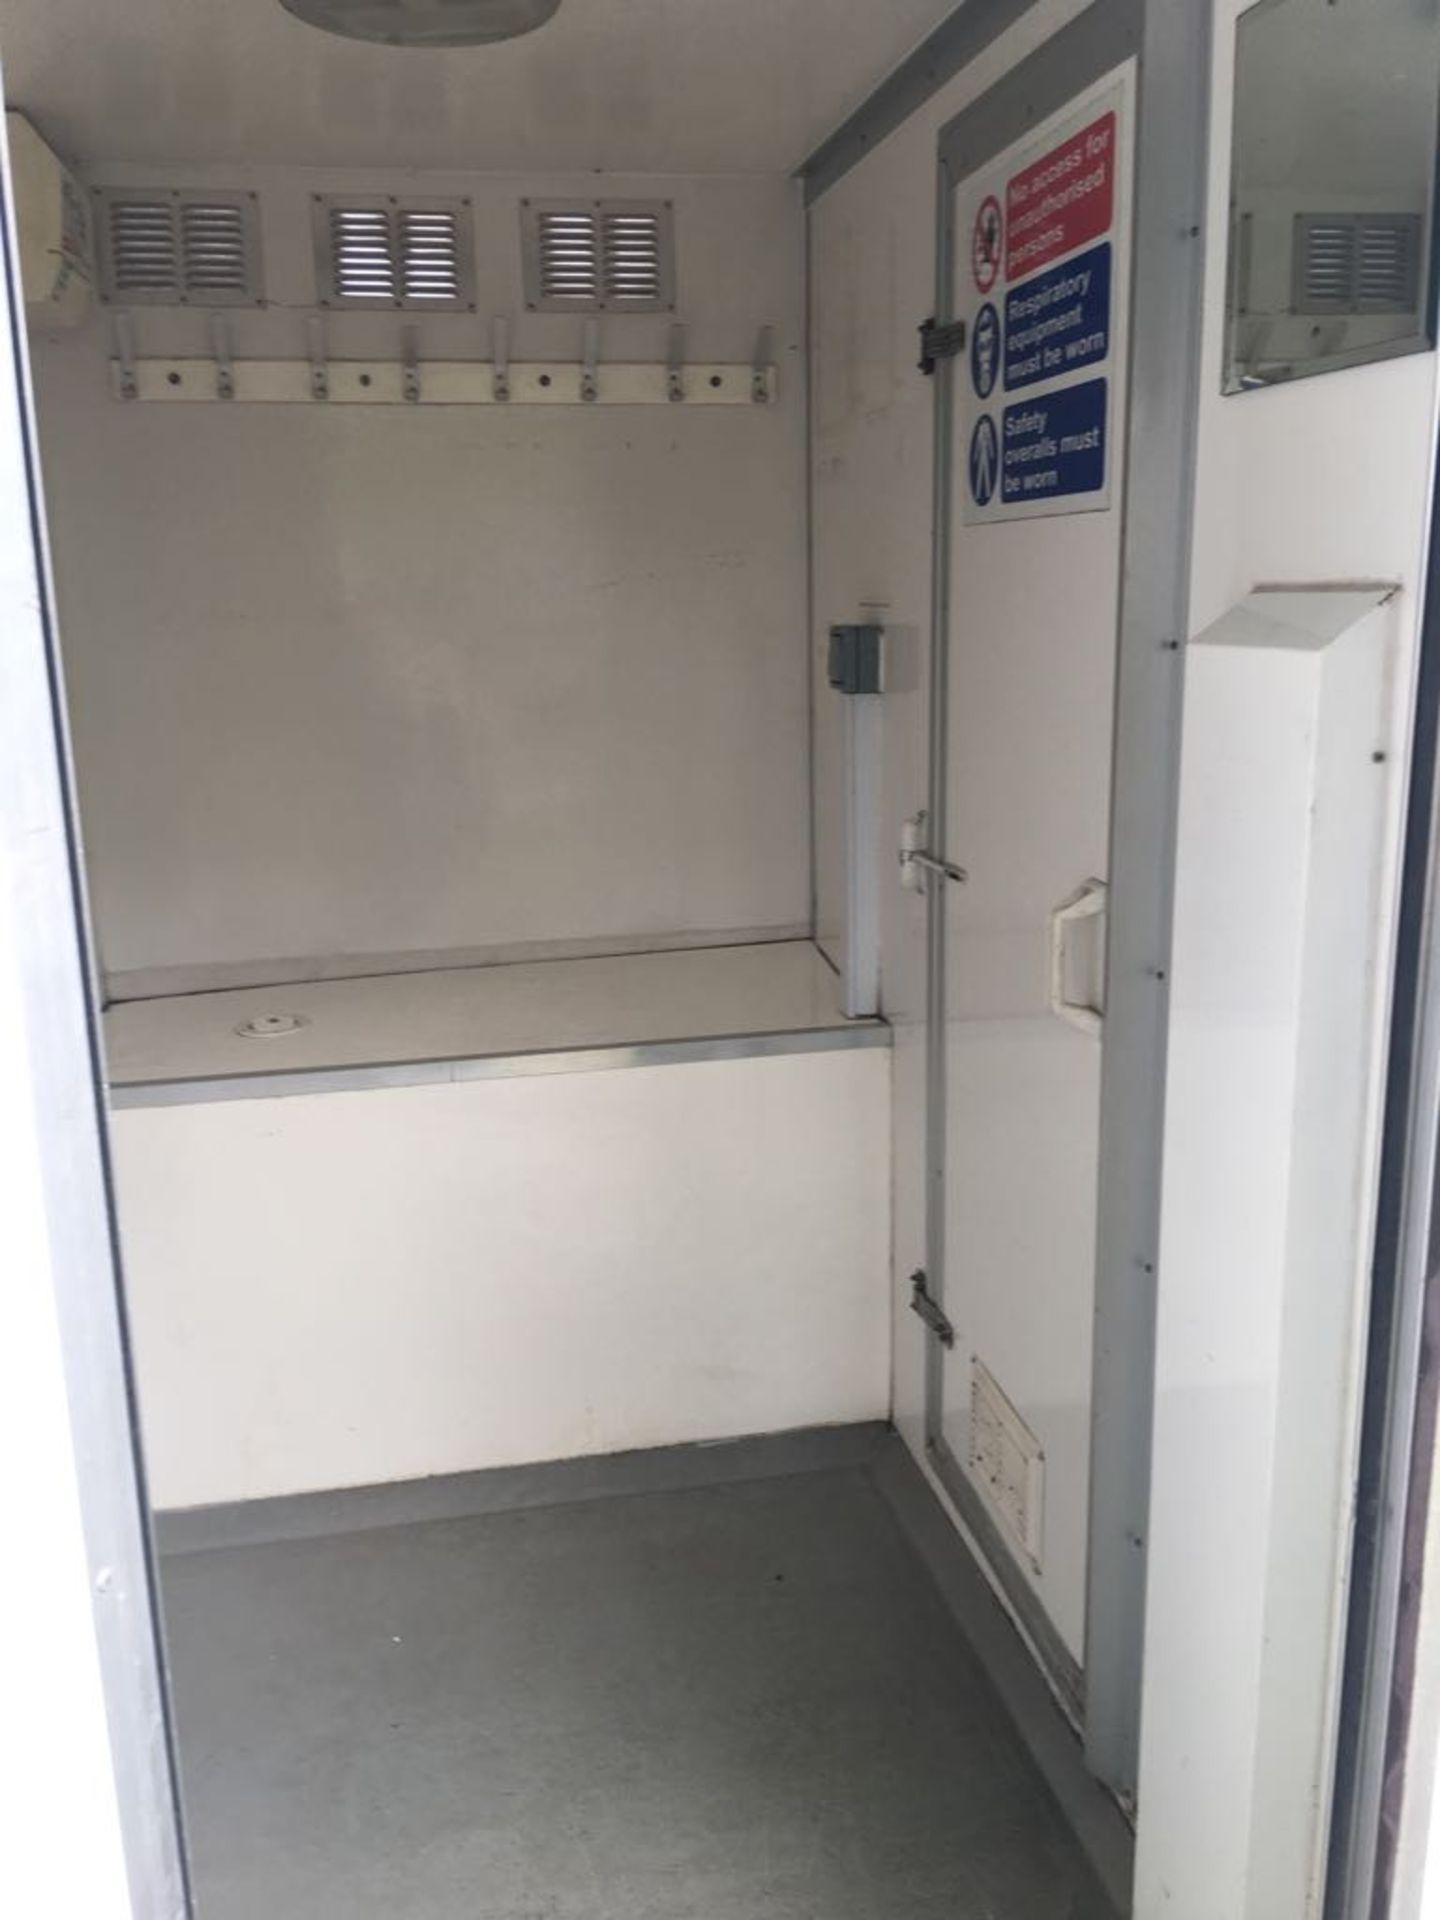 MOBILE TRAILER AMS TWIN SHOWER DECONTAMINATION UNIT AND CHANGING ROOMS - Image 17 of 27